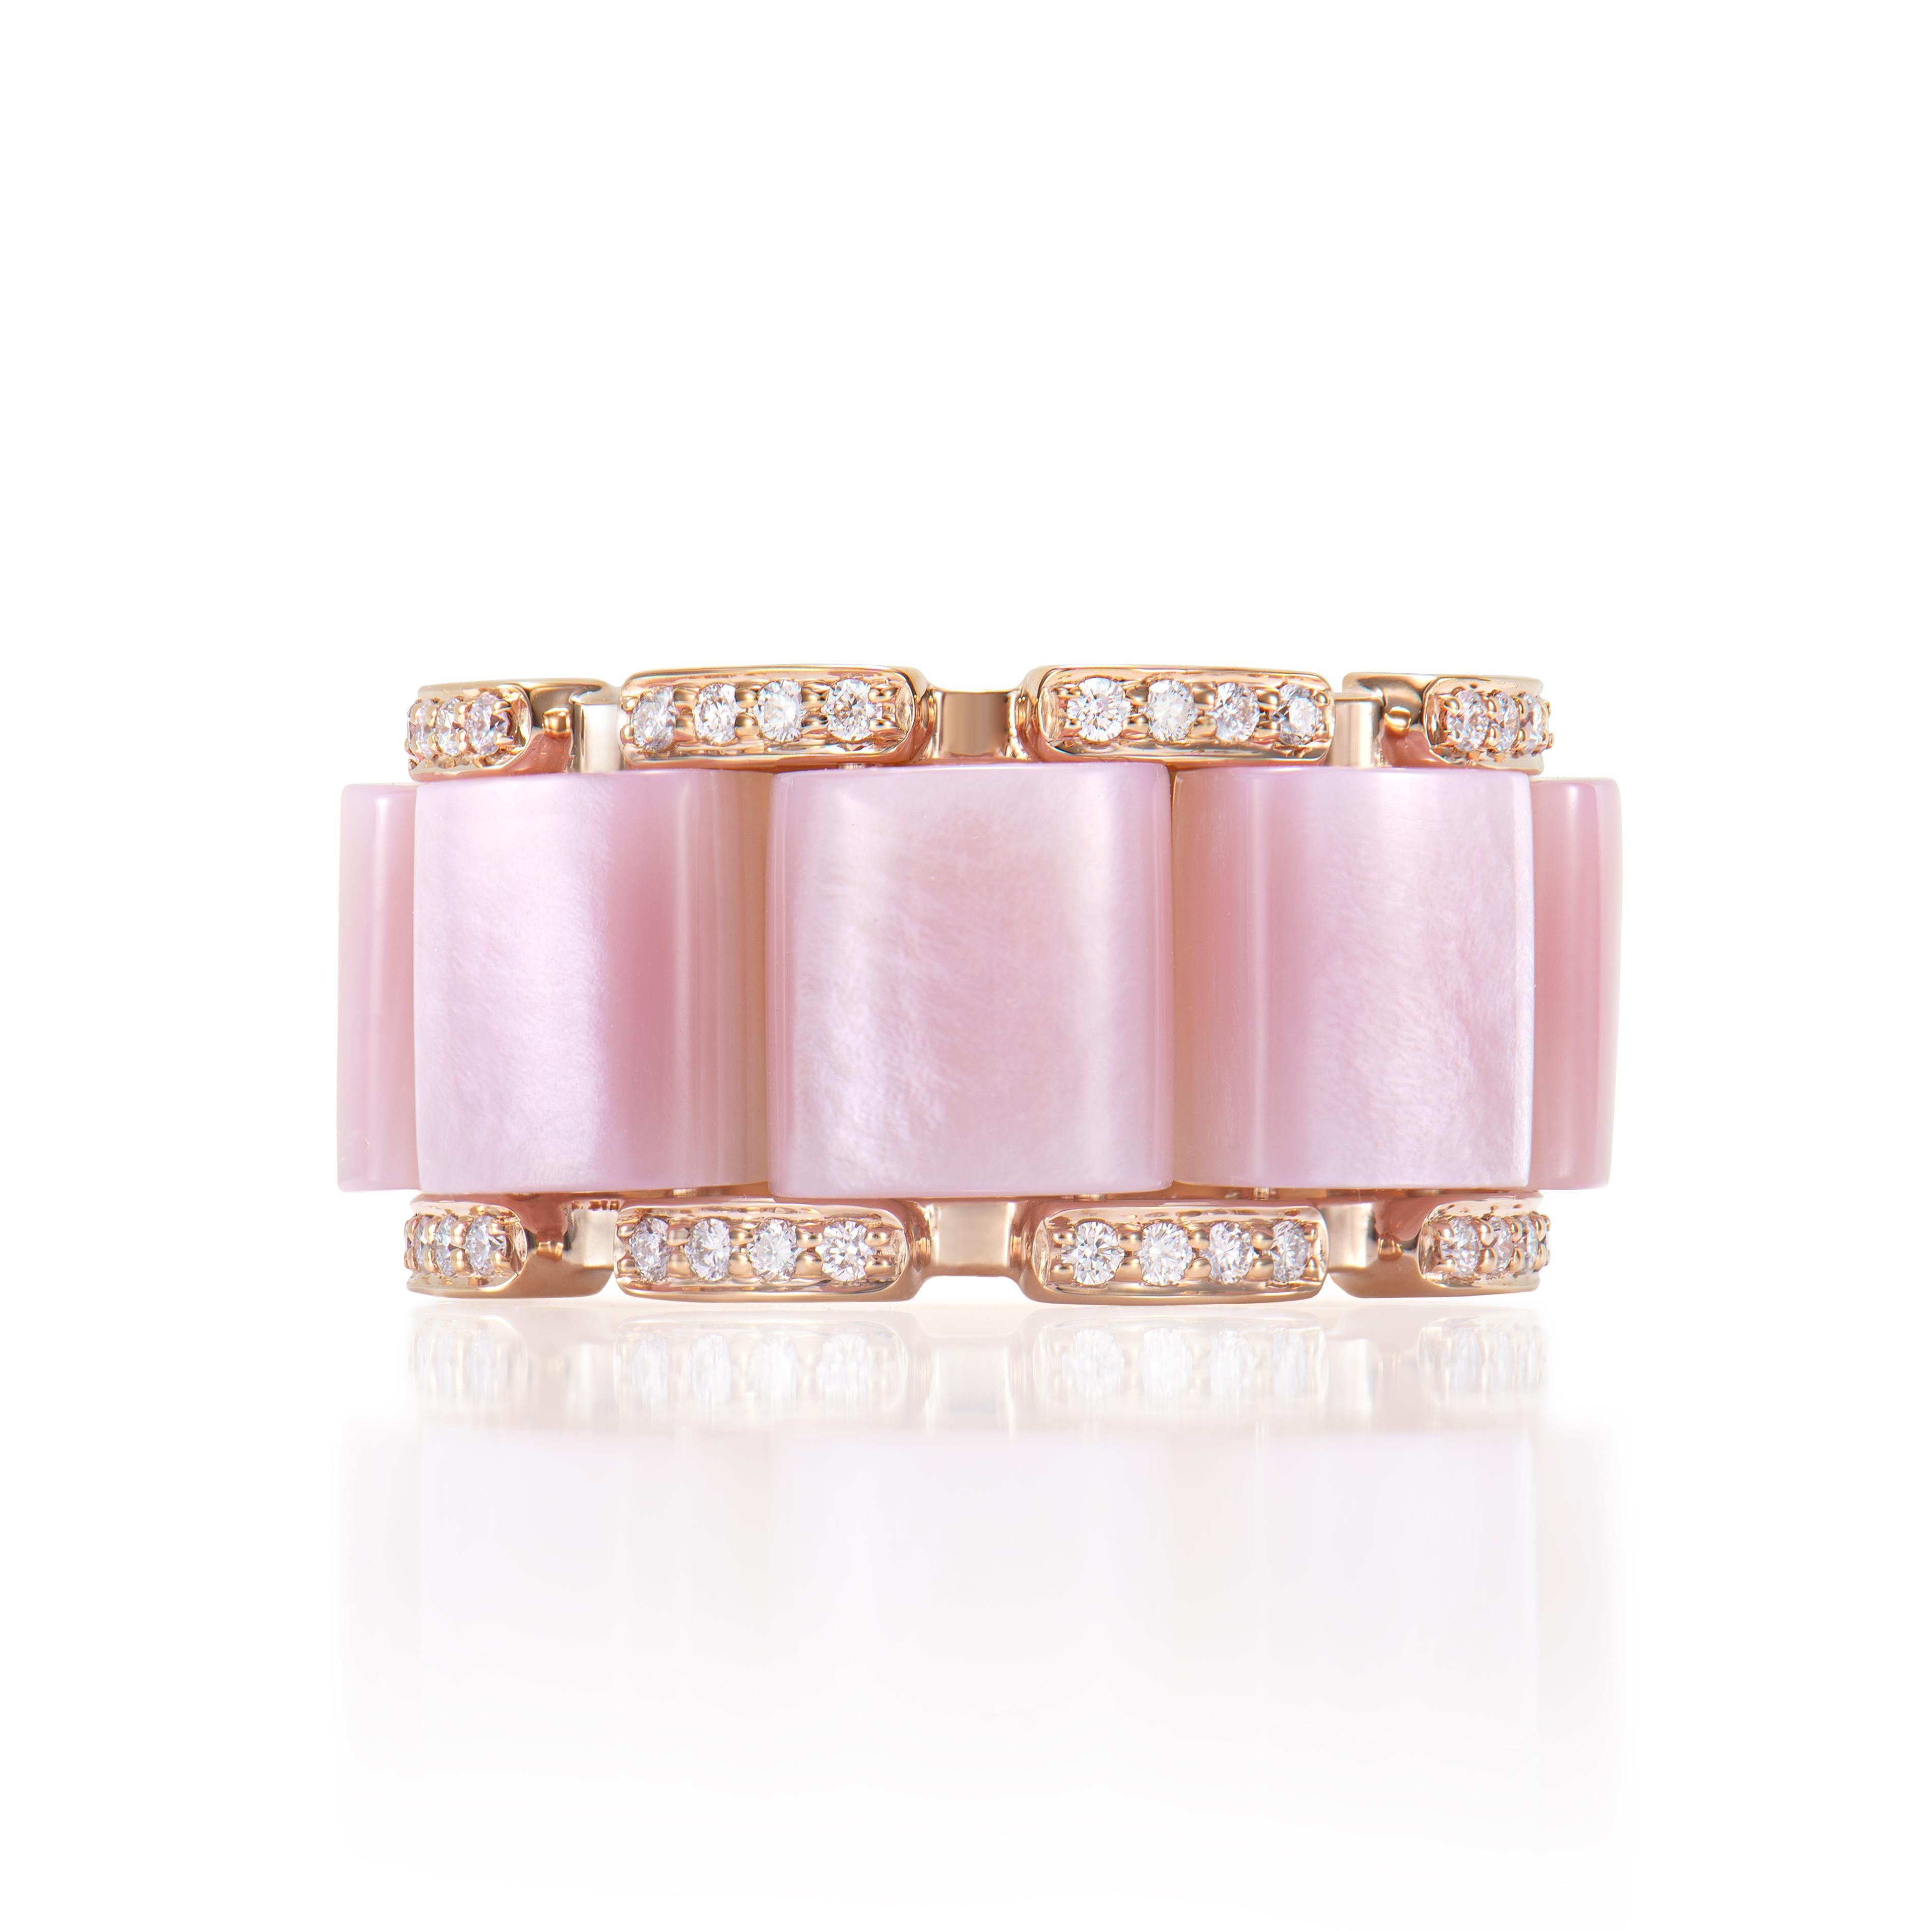 Contemporary 15.53 Carat Pink Opal Fancy Ring in 18Karat Rose Gold with White Diamond.   For Sale